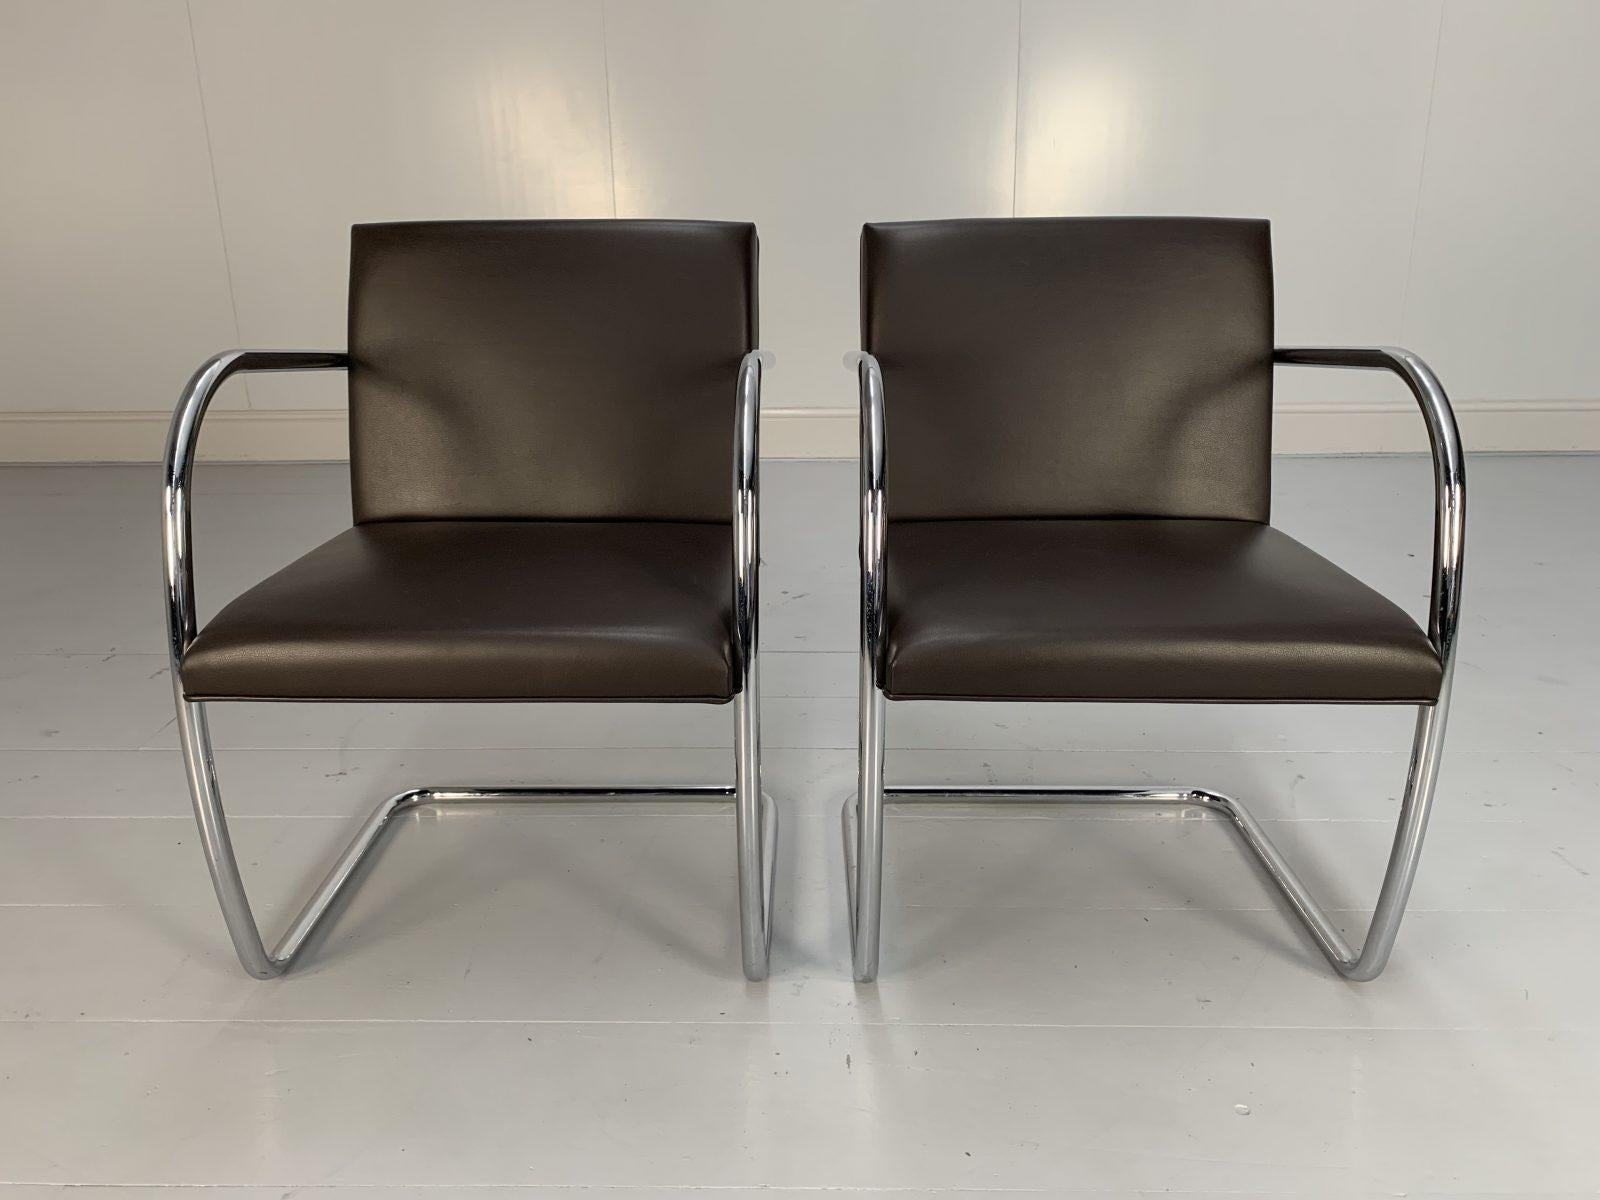 Pair of Knoll Studio “Brno Tubular” Lounge Chair Armchairs in Dark Brown Leather In Good Condition For Sale In Barrowford, GB